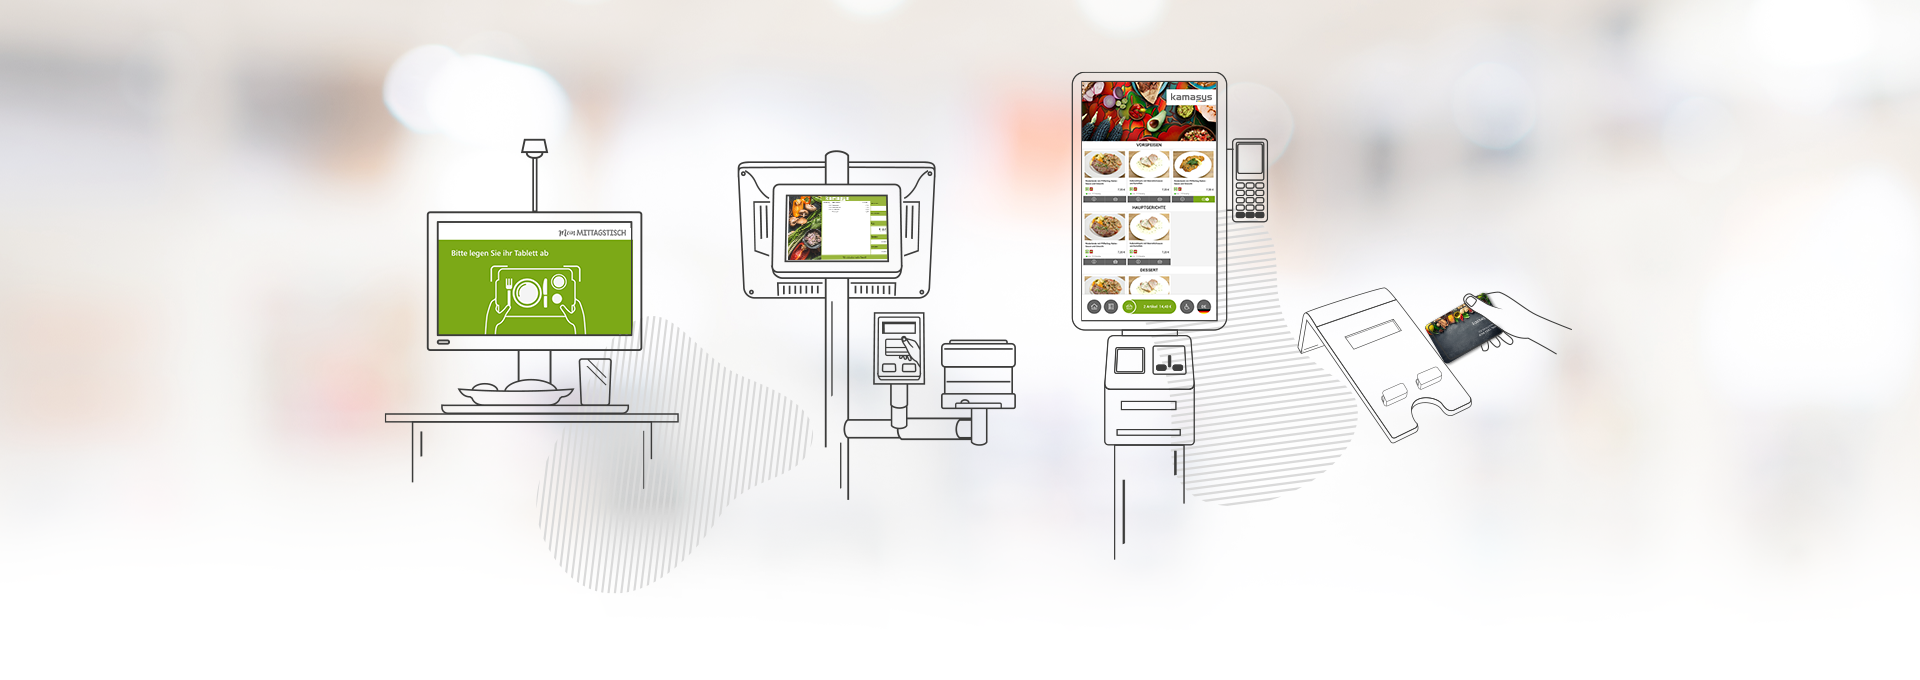 kamasys banner self-service checkouts for company catering